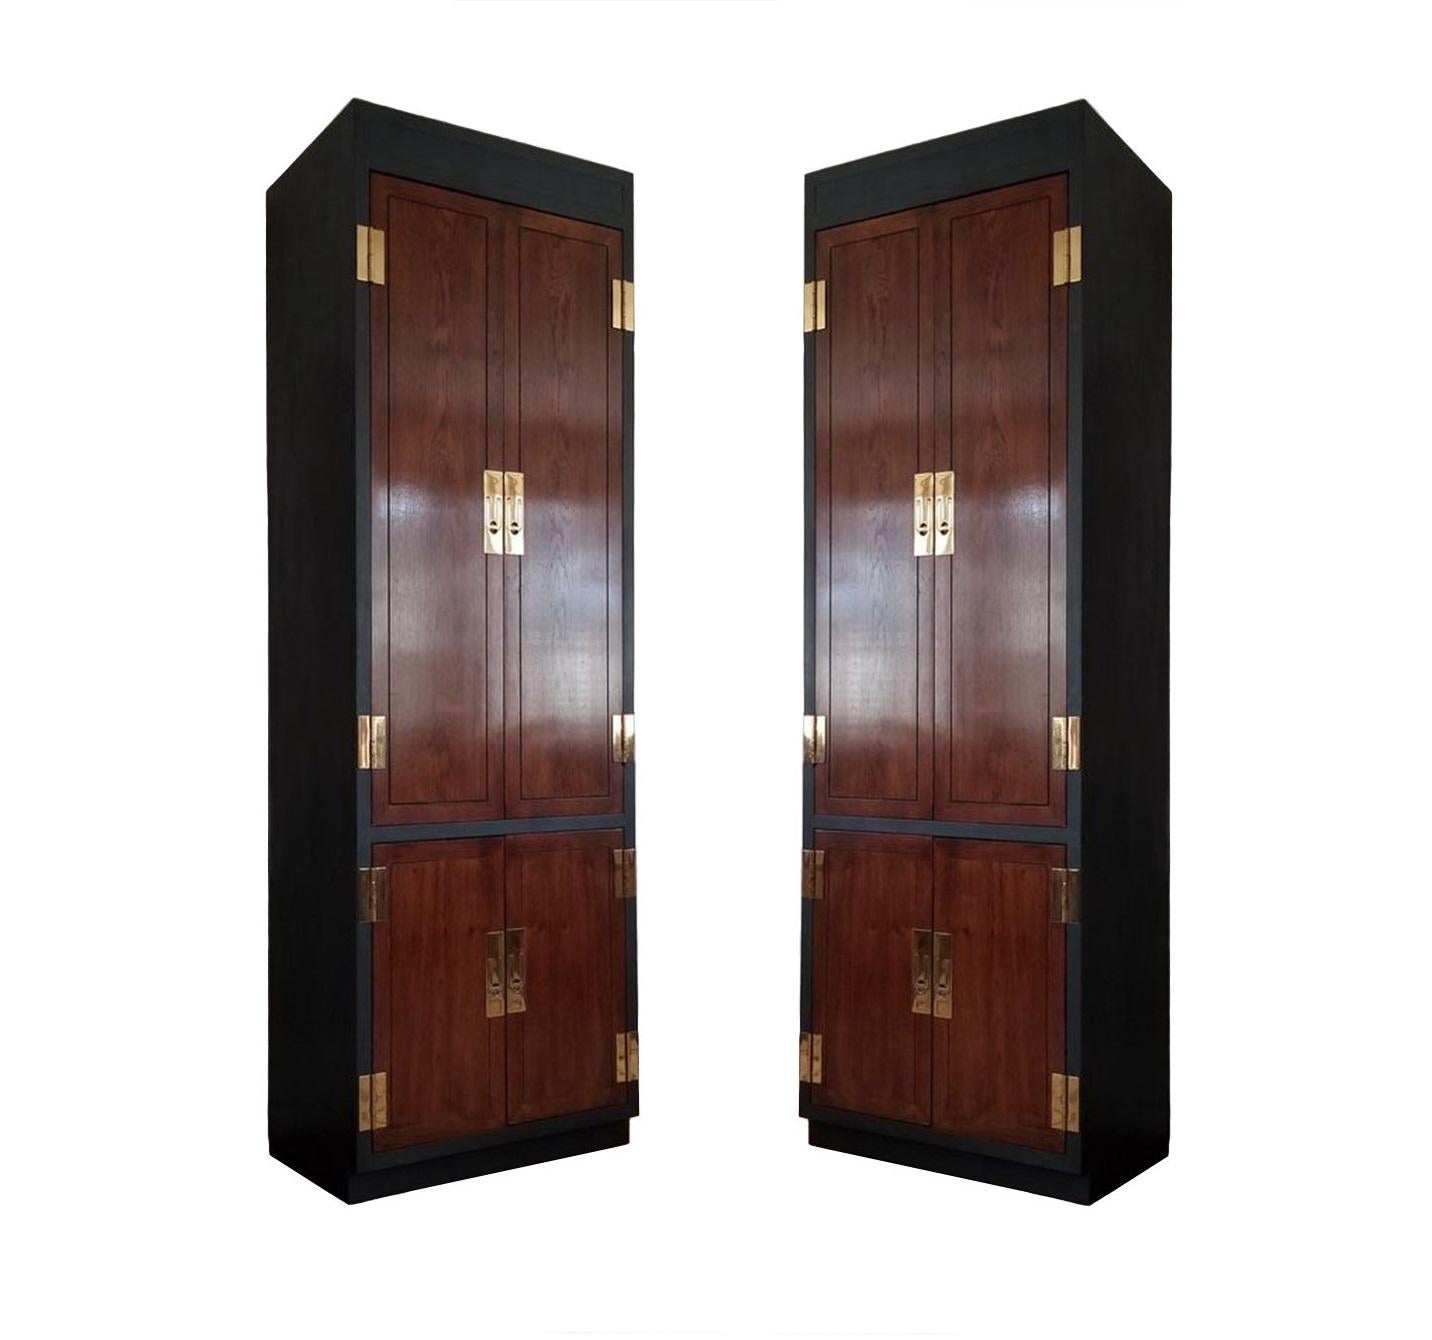 Vintage Campaign style chifforobes or cabinets, made by esteemed American manufacturer, Henredon. Part of Henredon’s early Scene One collection. Each cabinet professionally lacquered hardwood case, dark-stained fronts fitted with brass hinges and